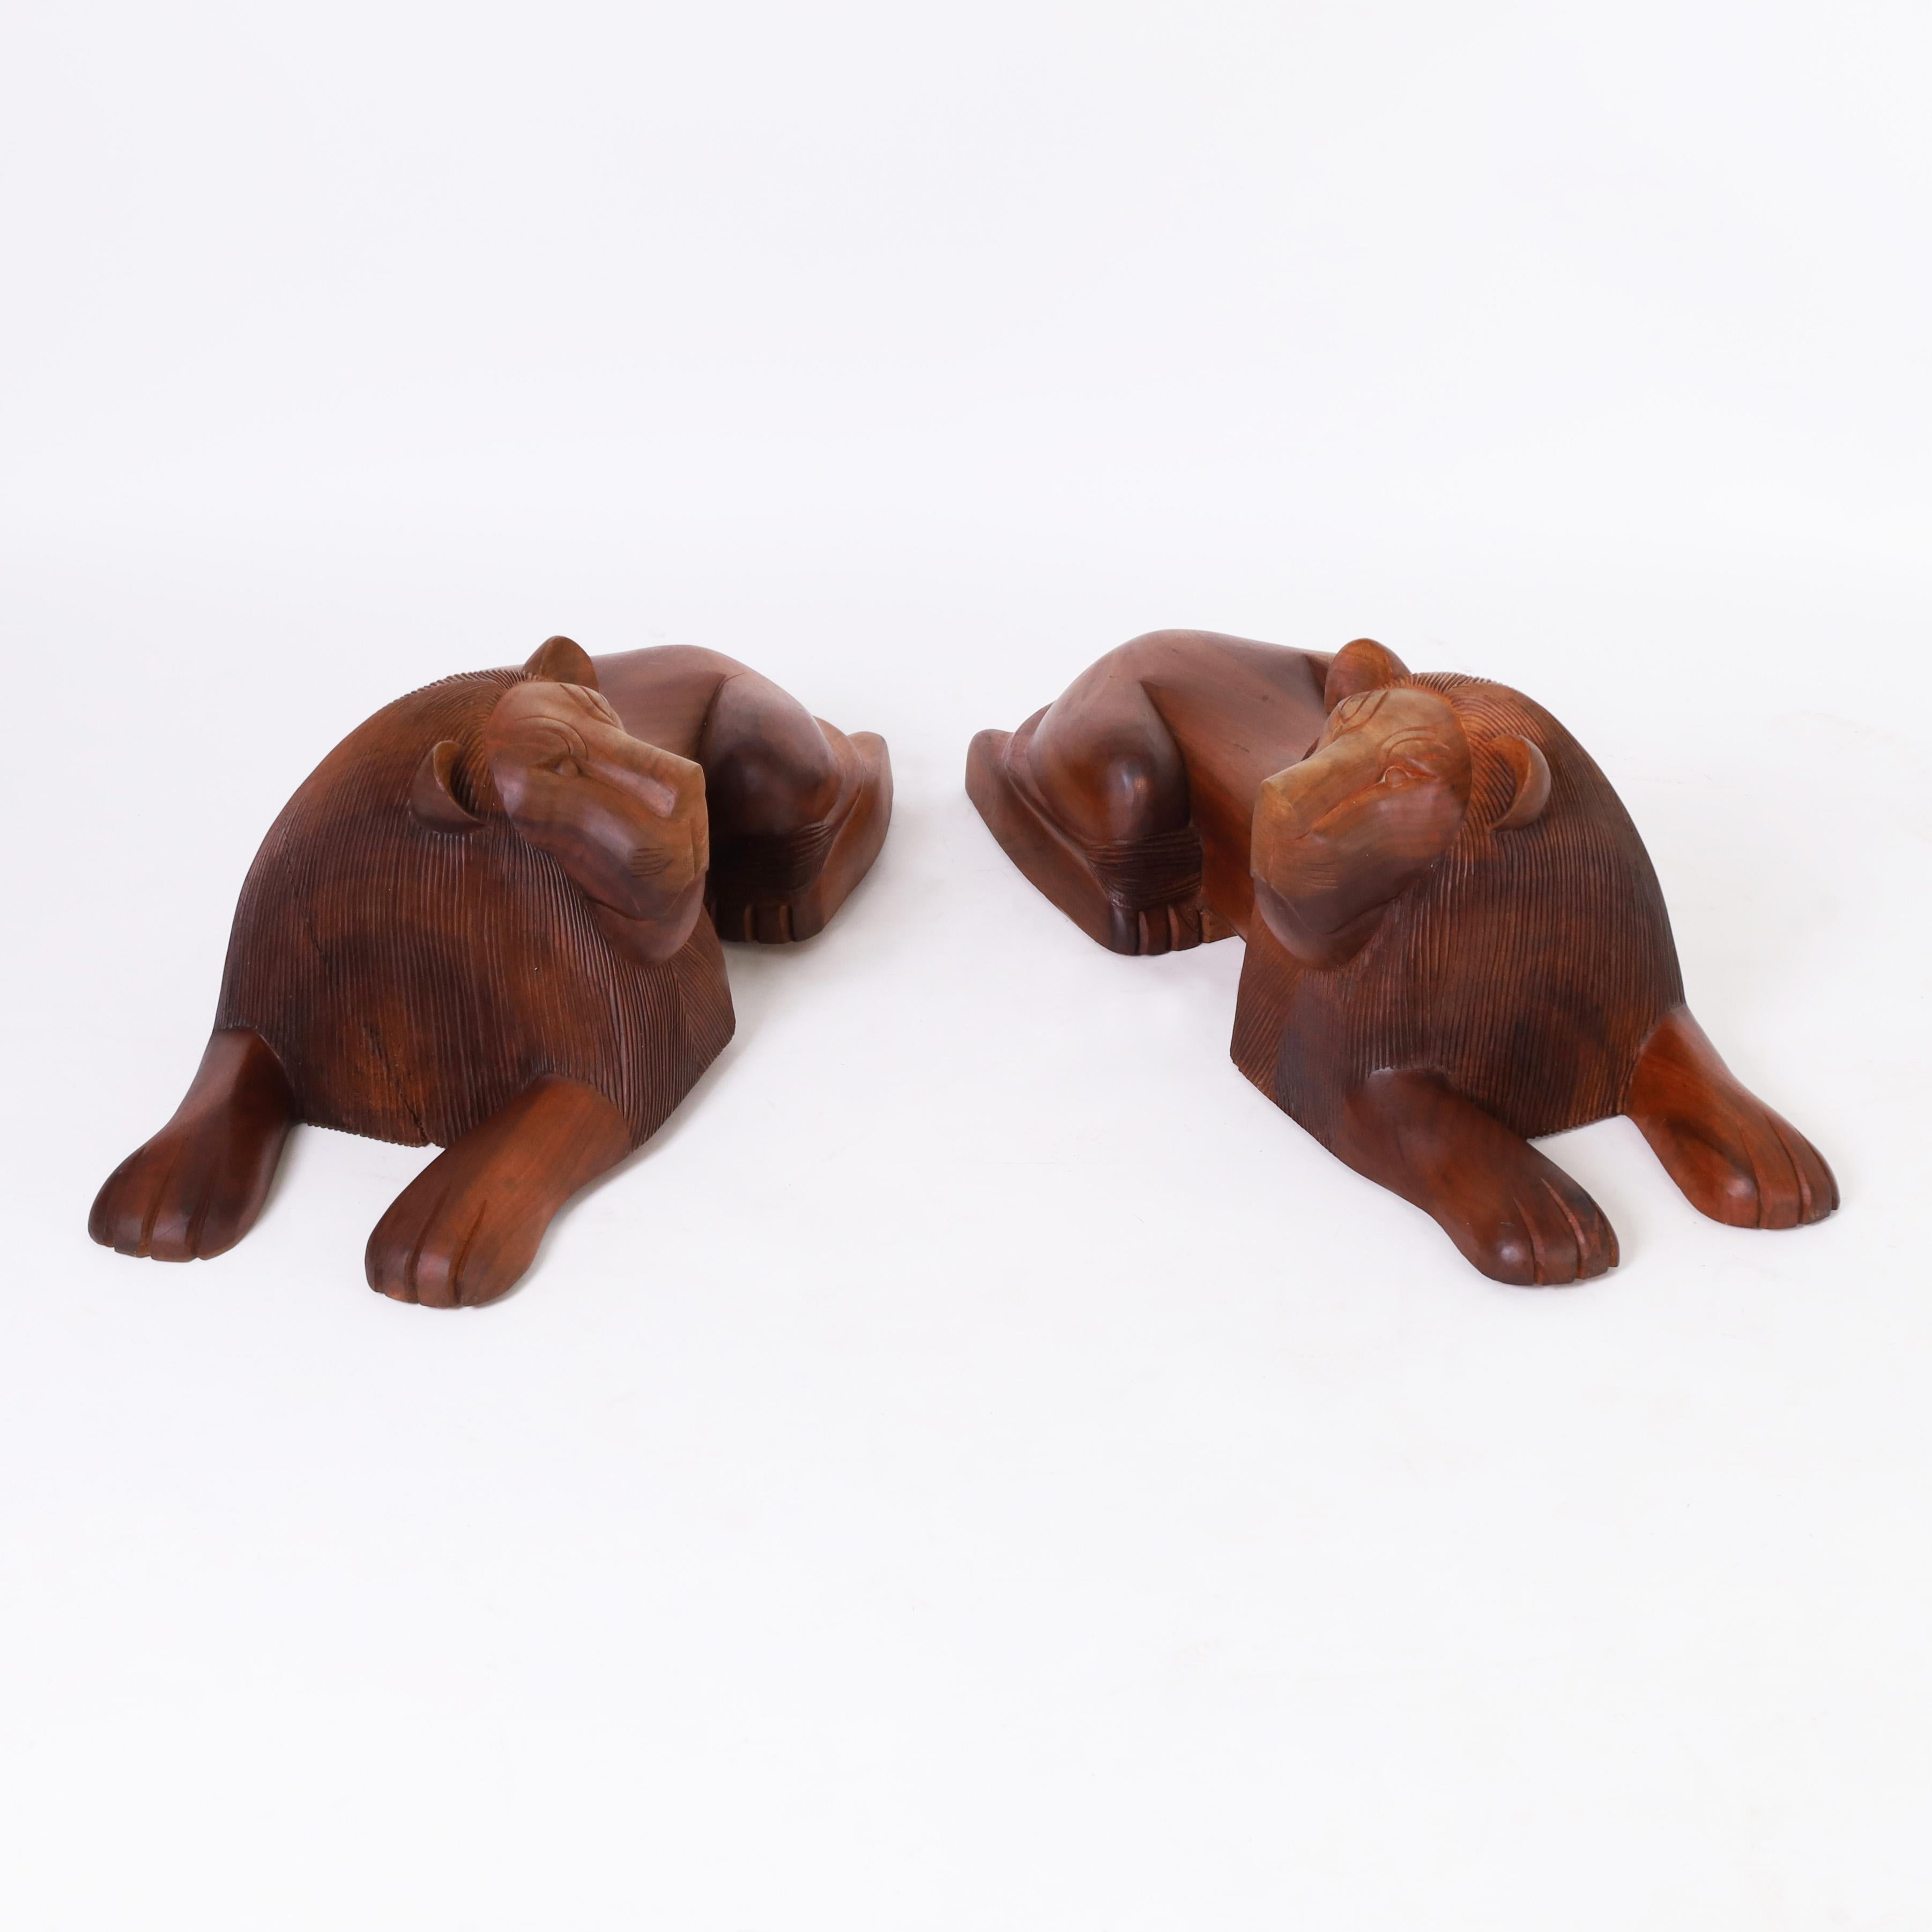 Pair of Carved Wood Lions from Minas Gerais - Modern Sculpture by Unknown